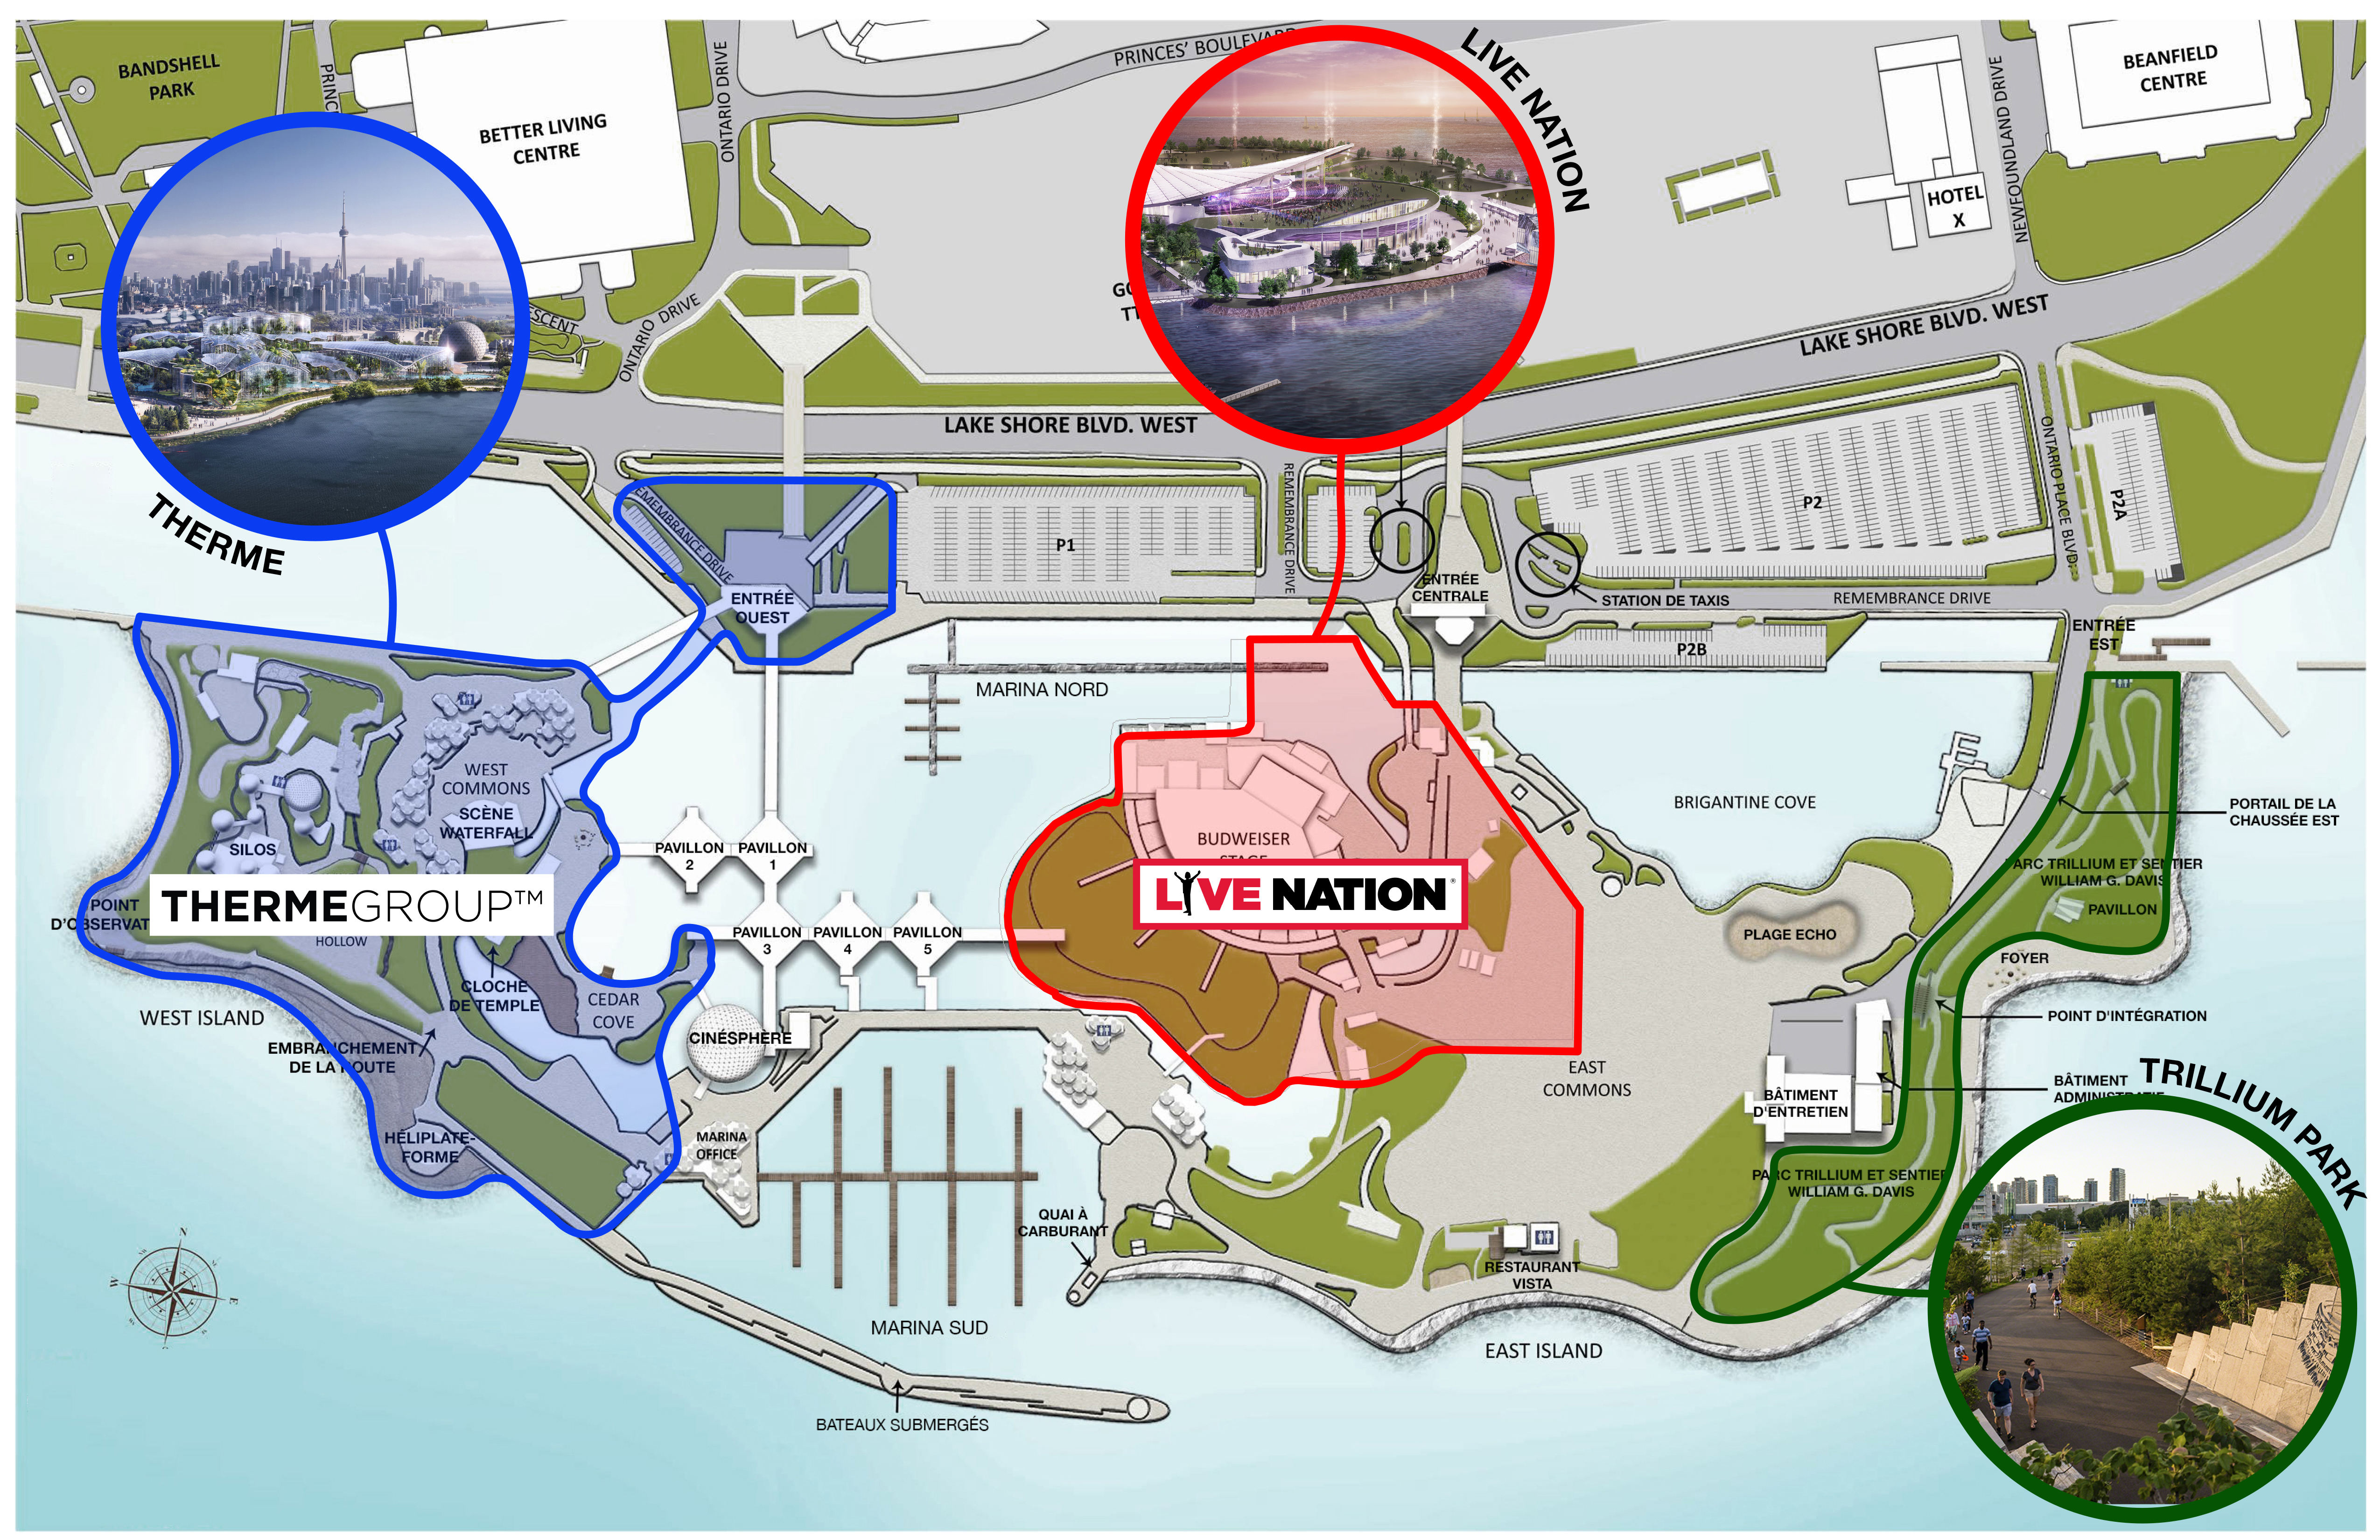 Map of the Ontario Place showing the tenanted areas. Live Nation is on the east island and Therme Group on the west island. The map also shows Trillium Park on the east edge of the east island.